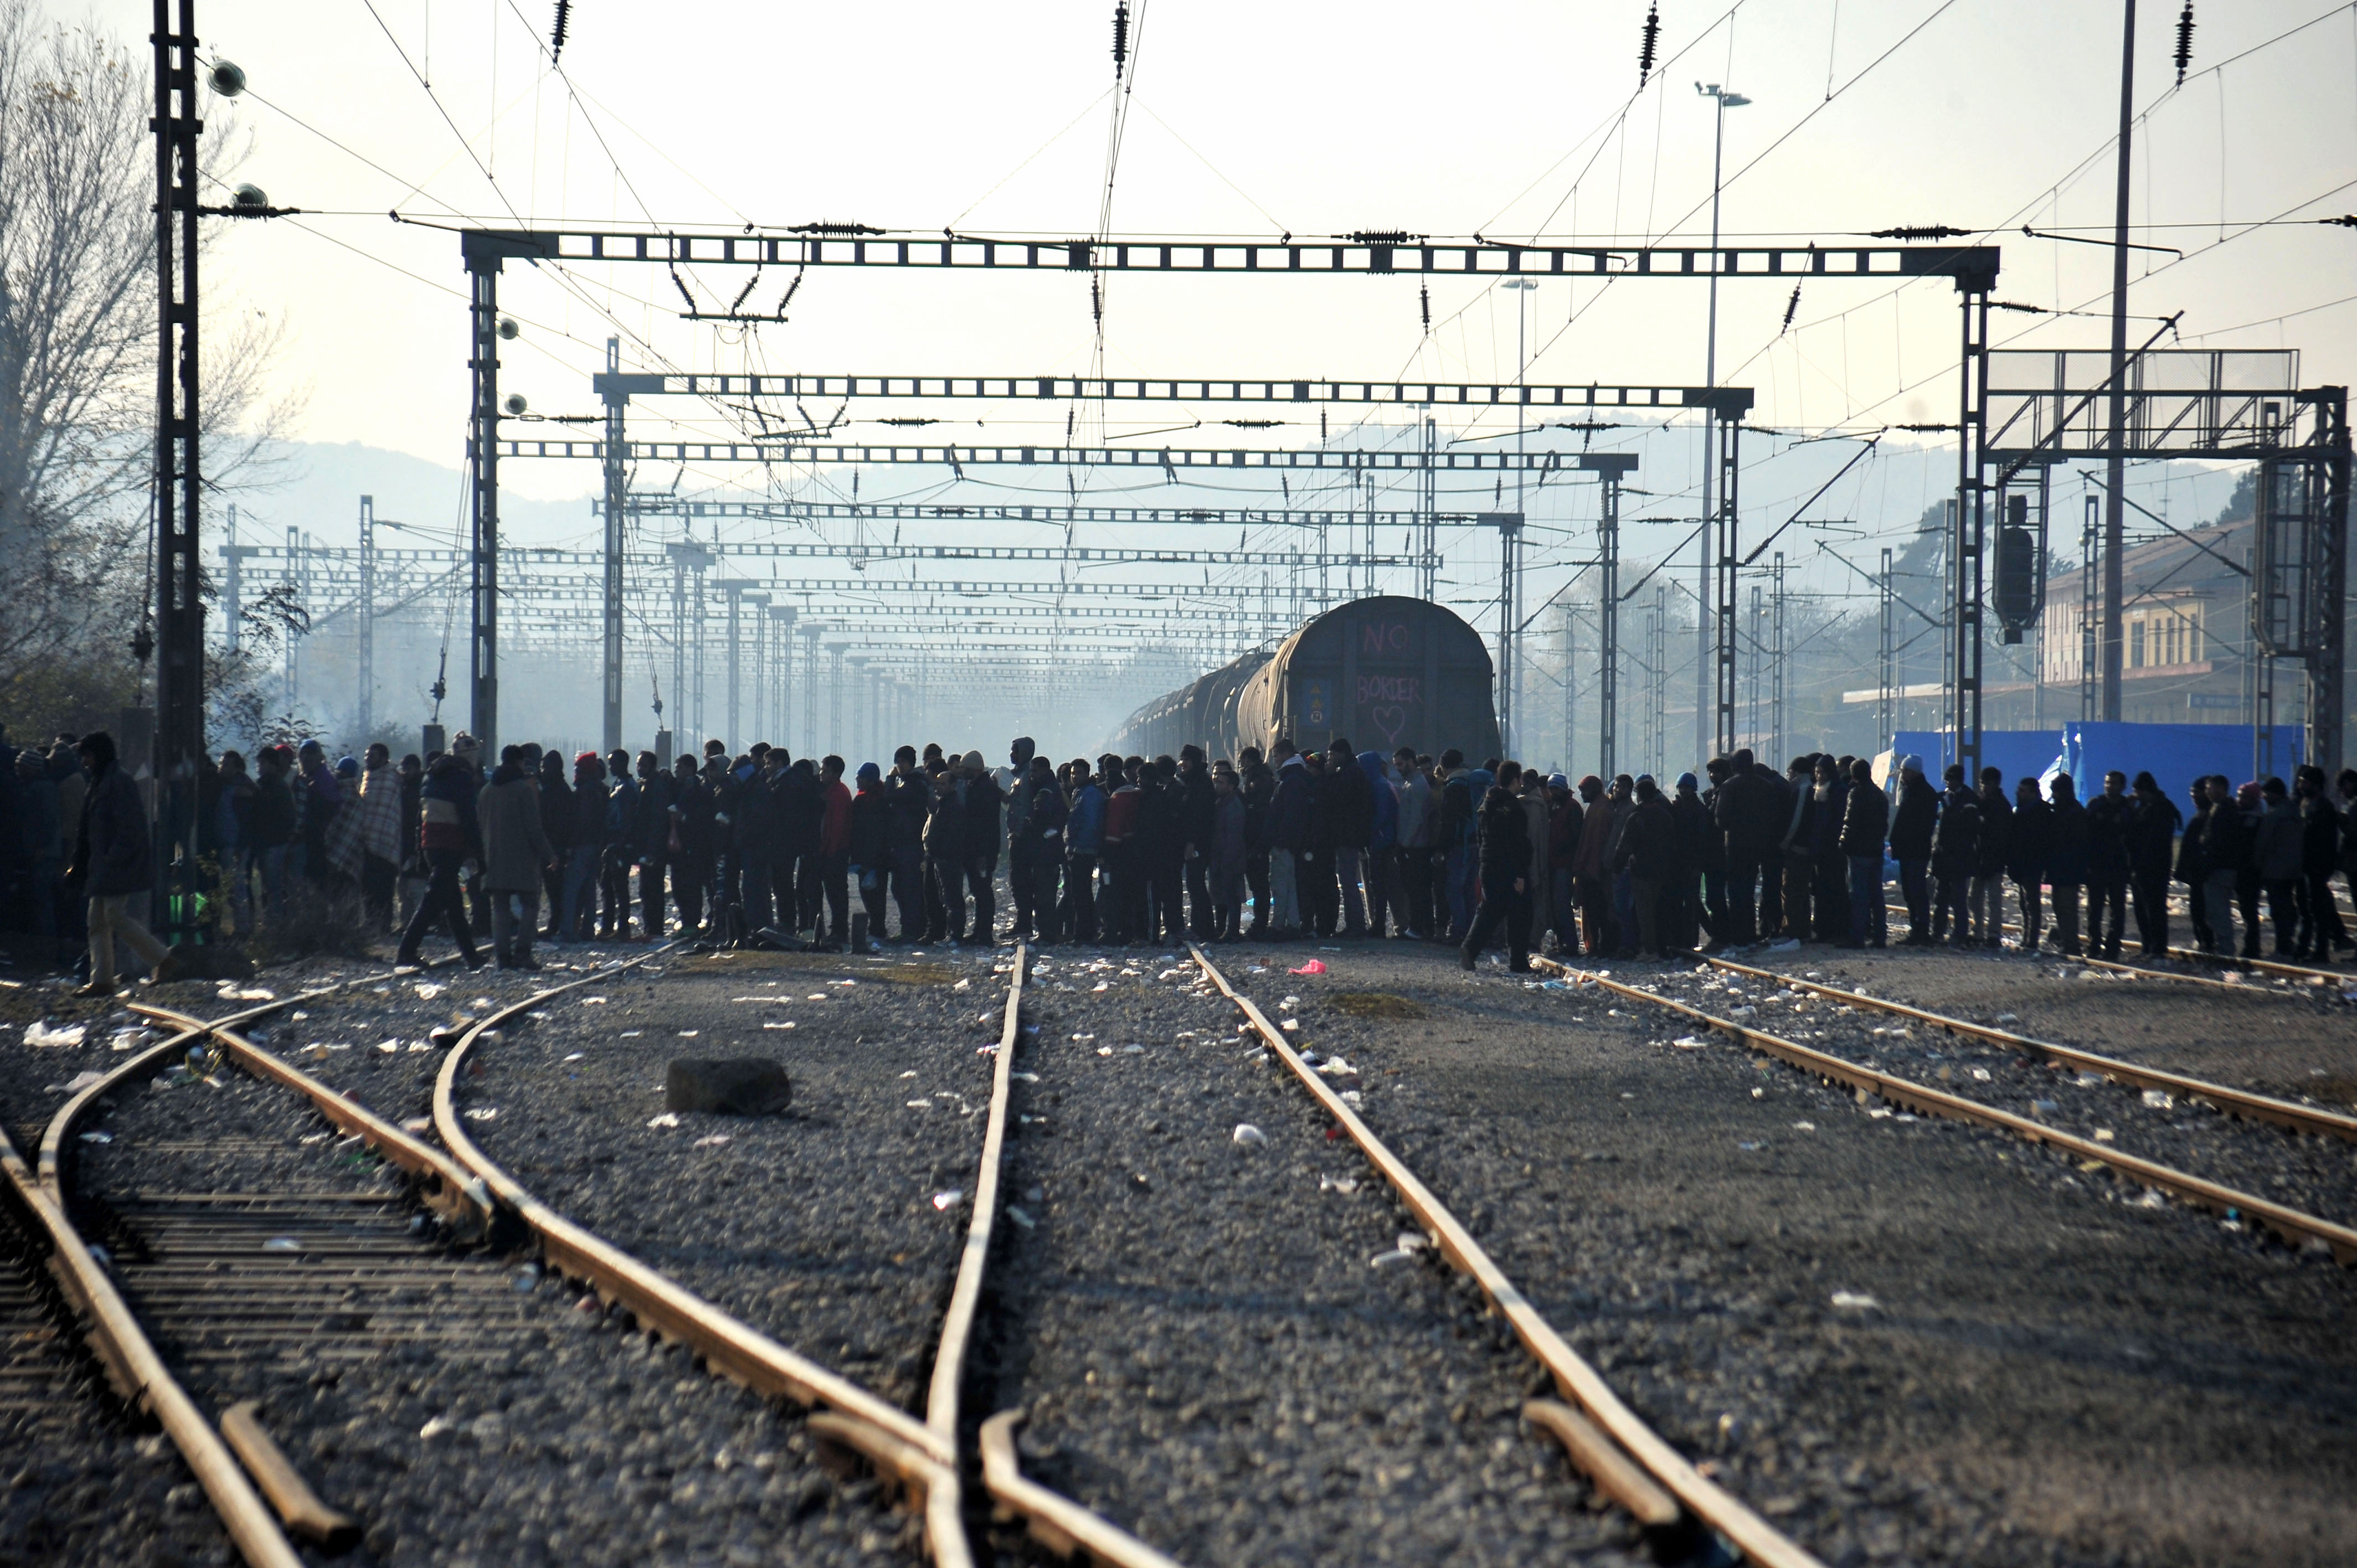 Railroad track in Idomeni cleared – Police concludes operation